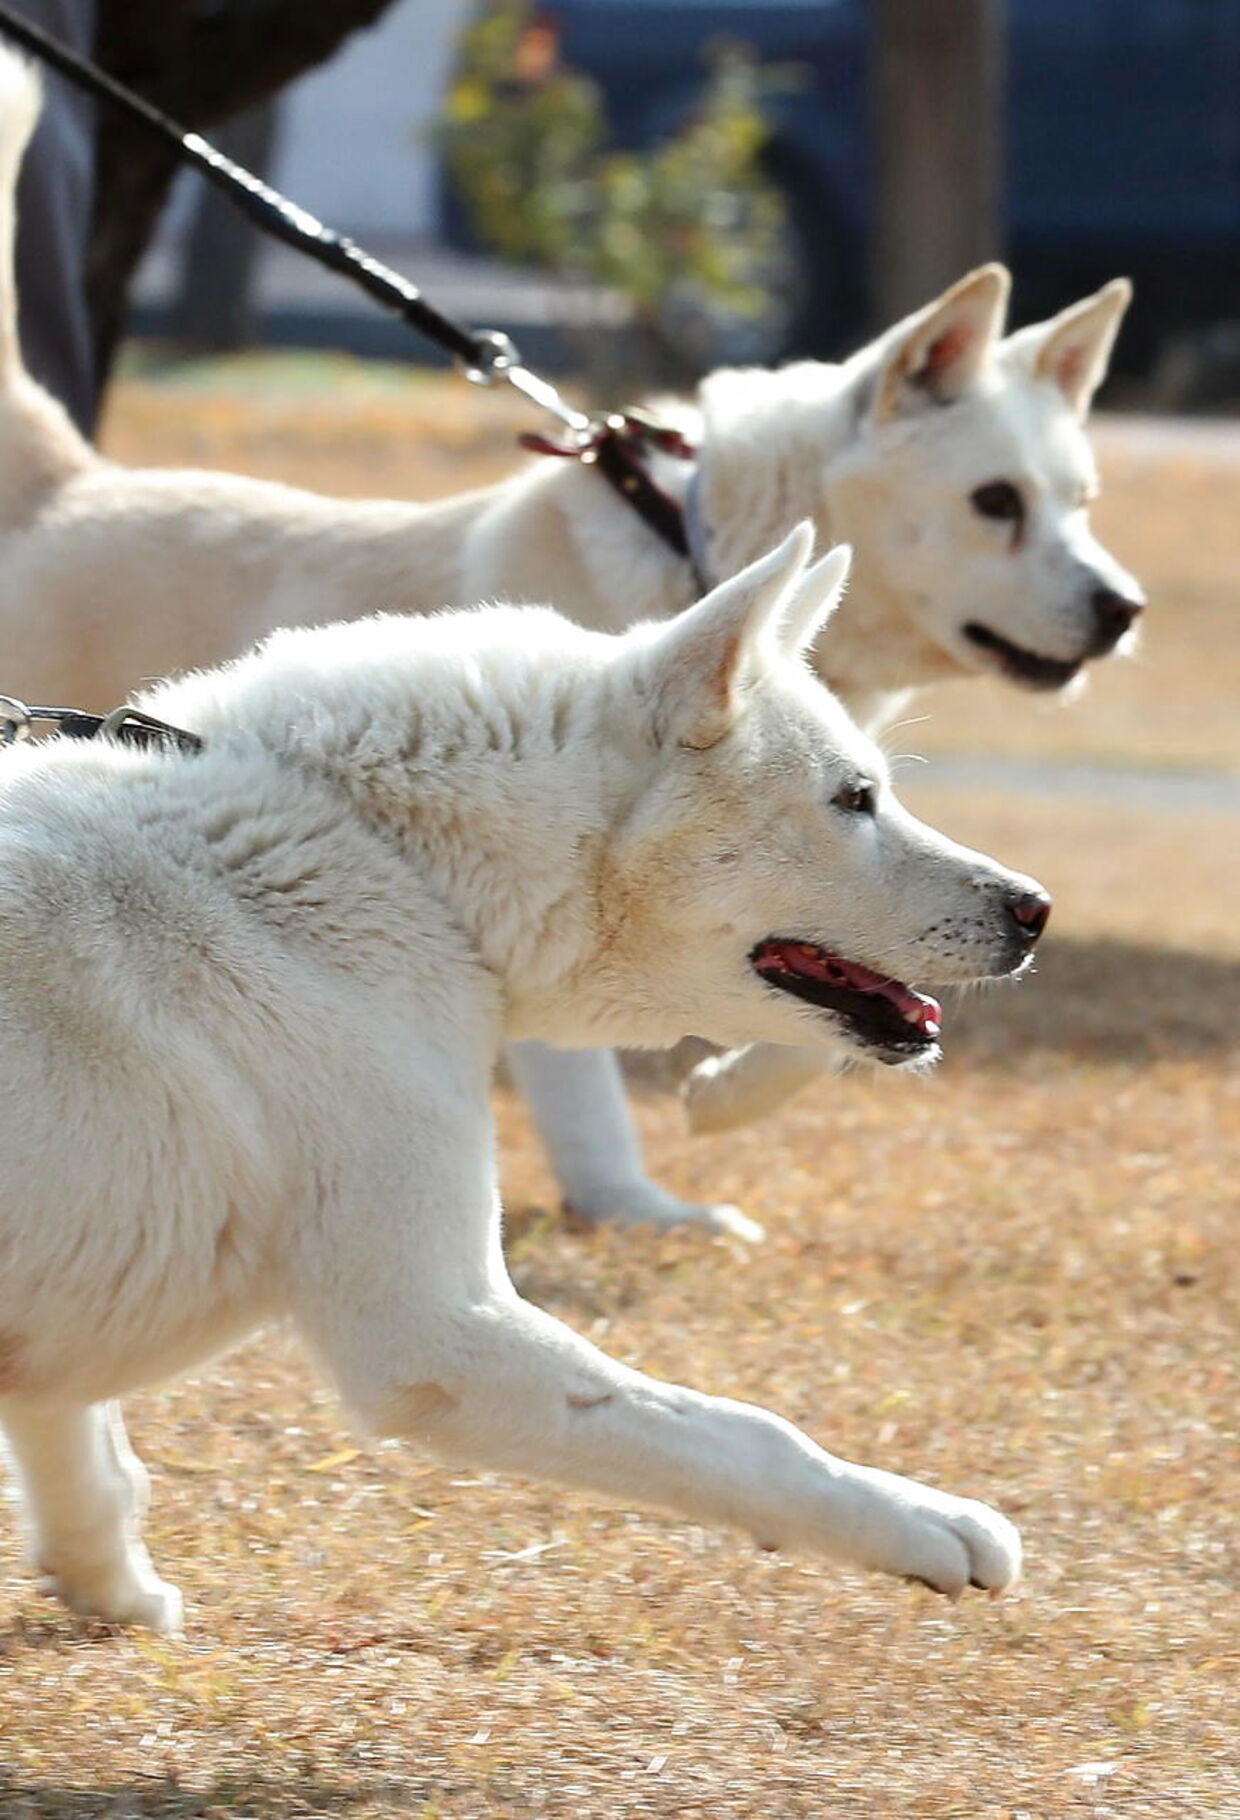 epa10297835 A pair of dogs, gifted by North Korean leader Kim Jong-un to South Korea's former President Moon Jae-in during peace talks in 2018, walk at a university veterinary hospital in Daegu, South Korea, 10 November 2022. The indigenous North Korean Pungsan-breed dogs Gomi and Songgang, legally owned by the state, have been staying at the hospital since 08 November 2022, when Moon delivered them to officials of the Presidential Archives, accusing current President Yoon Suk-yeol of blocking negotiations to allow the former president to keep them. EPA/YONHAP SOUTH KOREA OUT